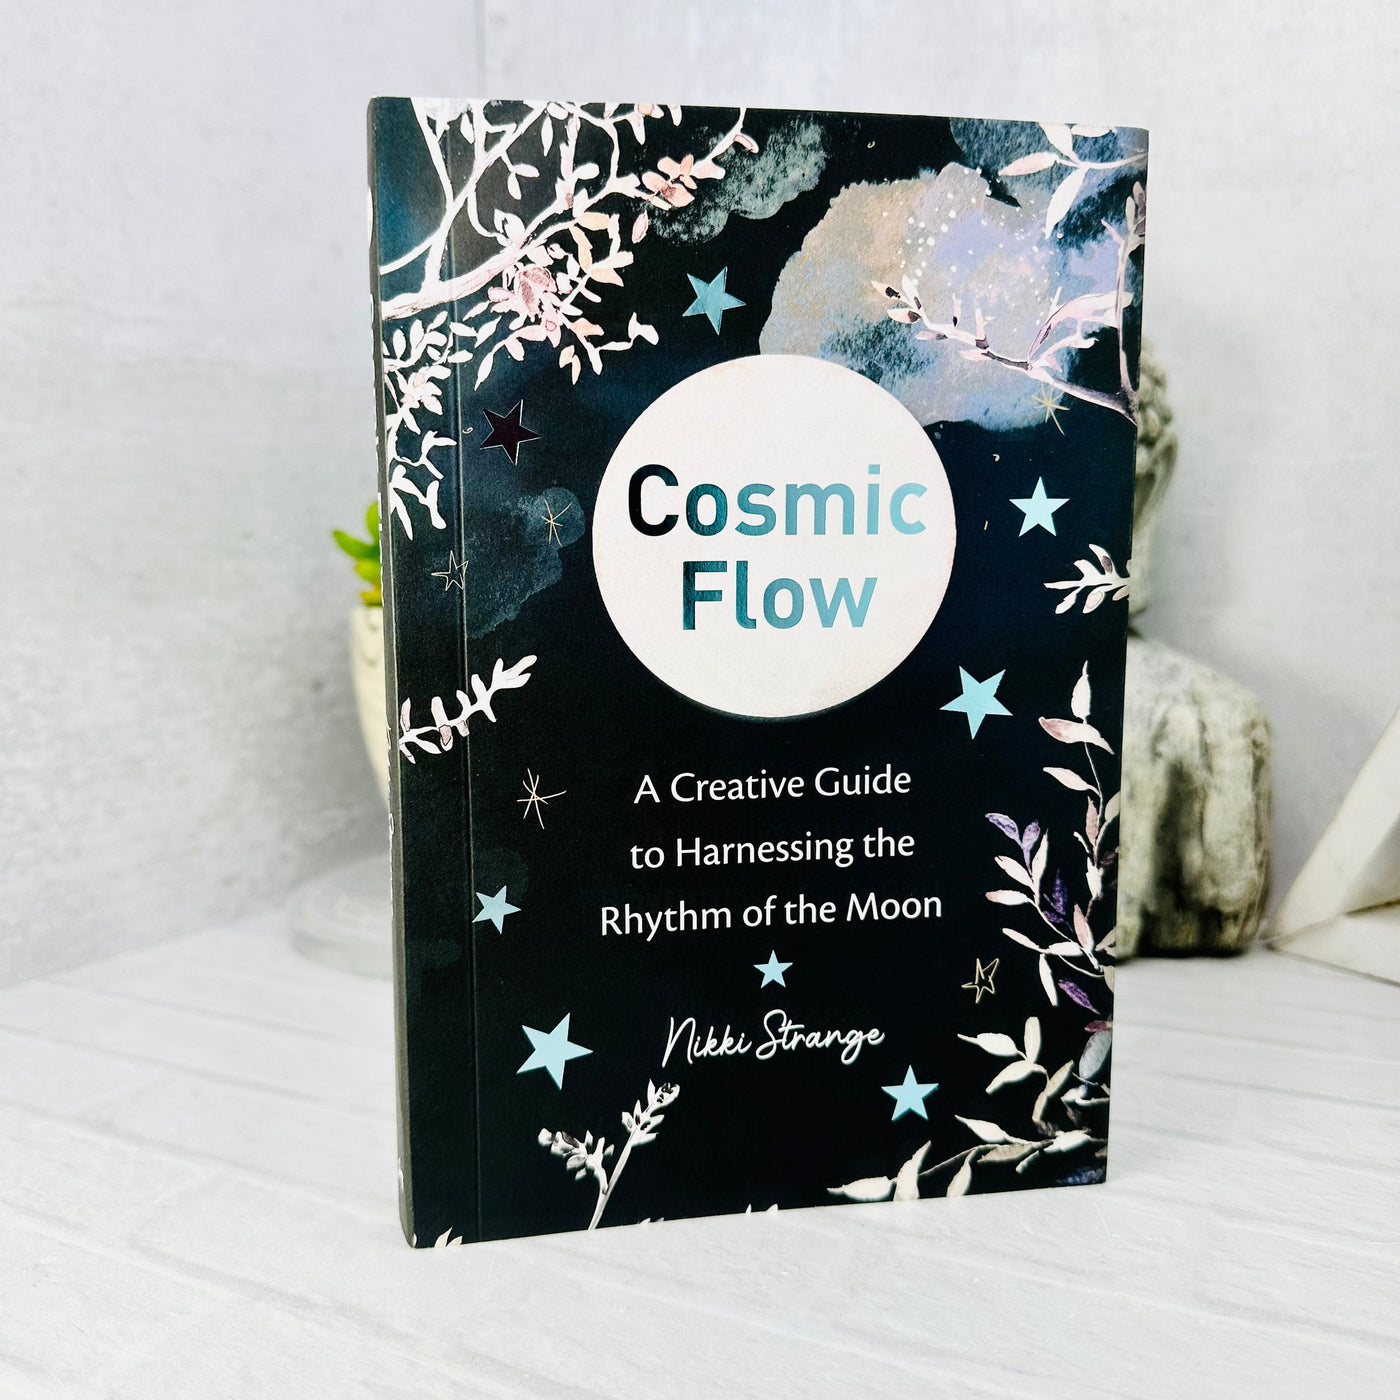 Cosmic Flow - front view of book